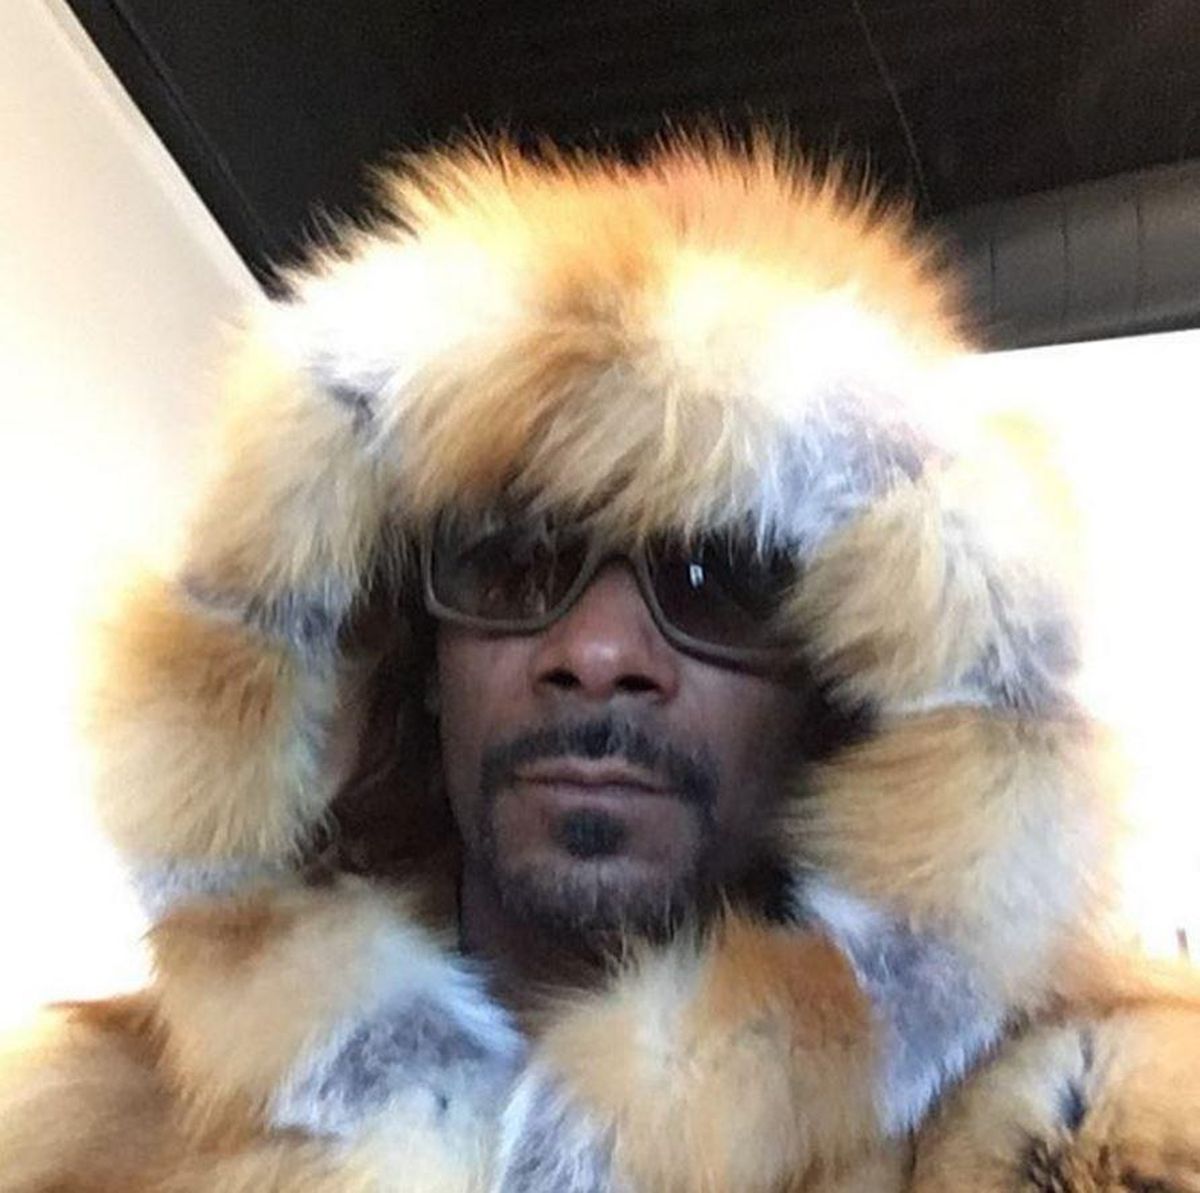 Rapper Snoop Dogg appeared at Royal’s Cannabis in Spokane on Dec. 7, 2016, and posted this photo to his Instagram account. (Snoop Dogg Instagram)